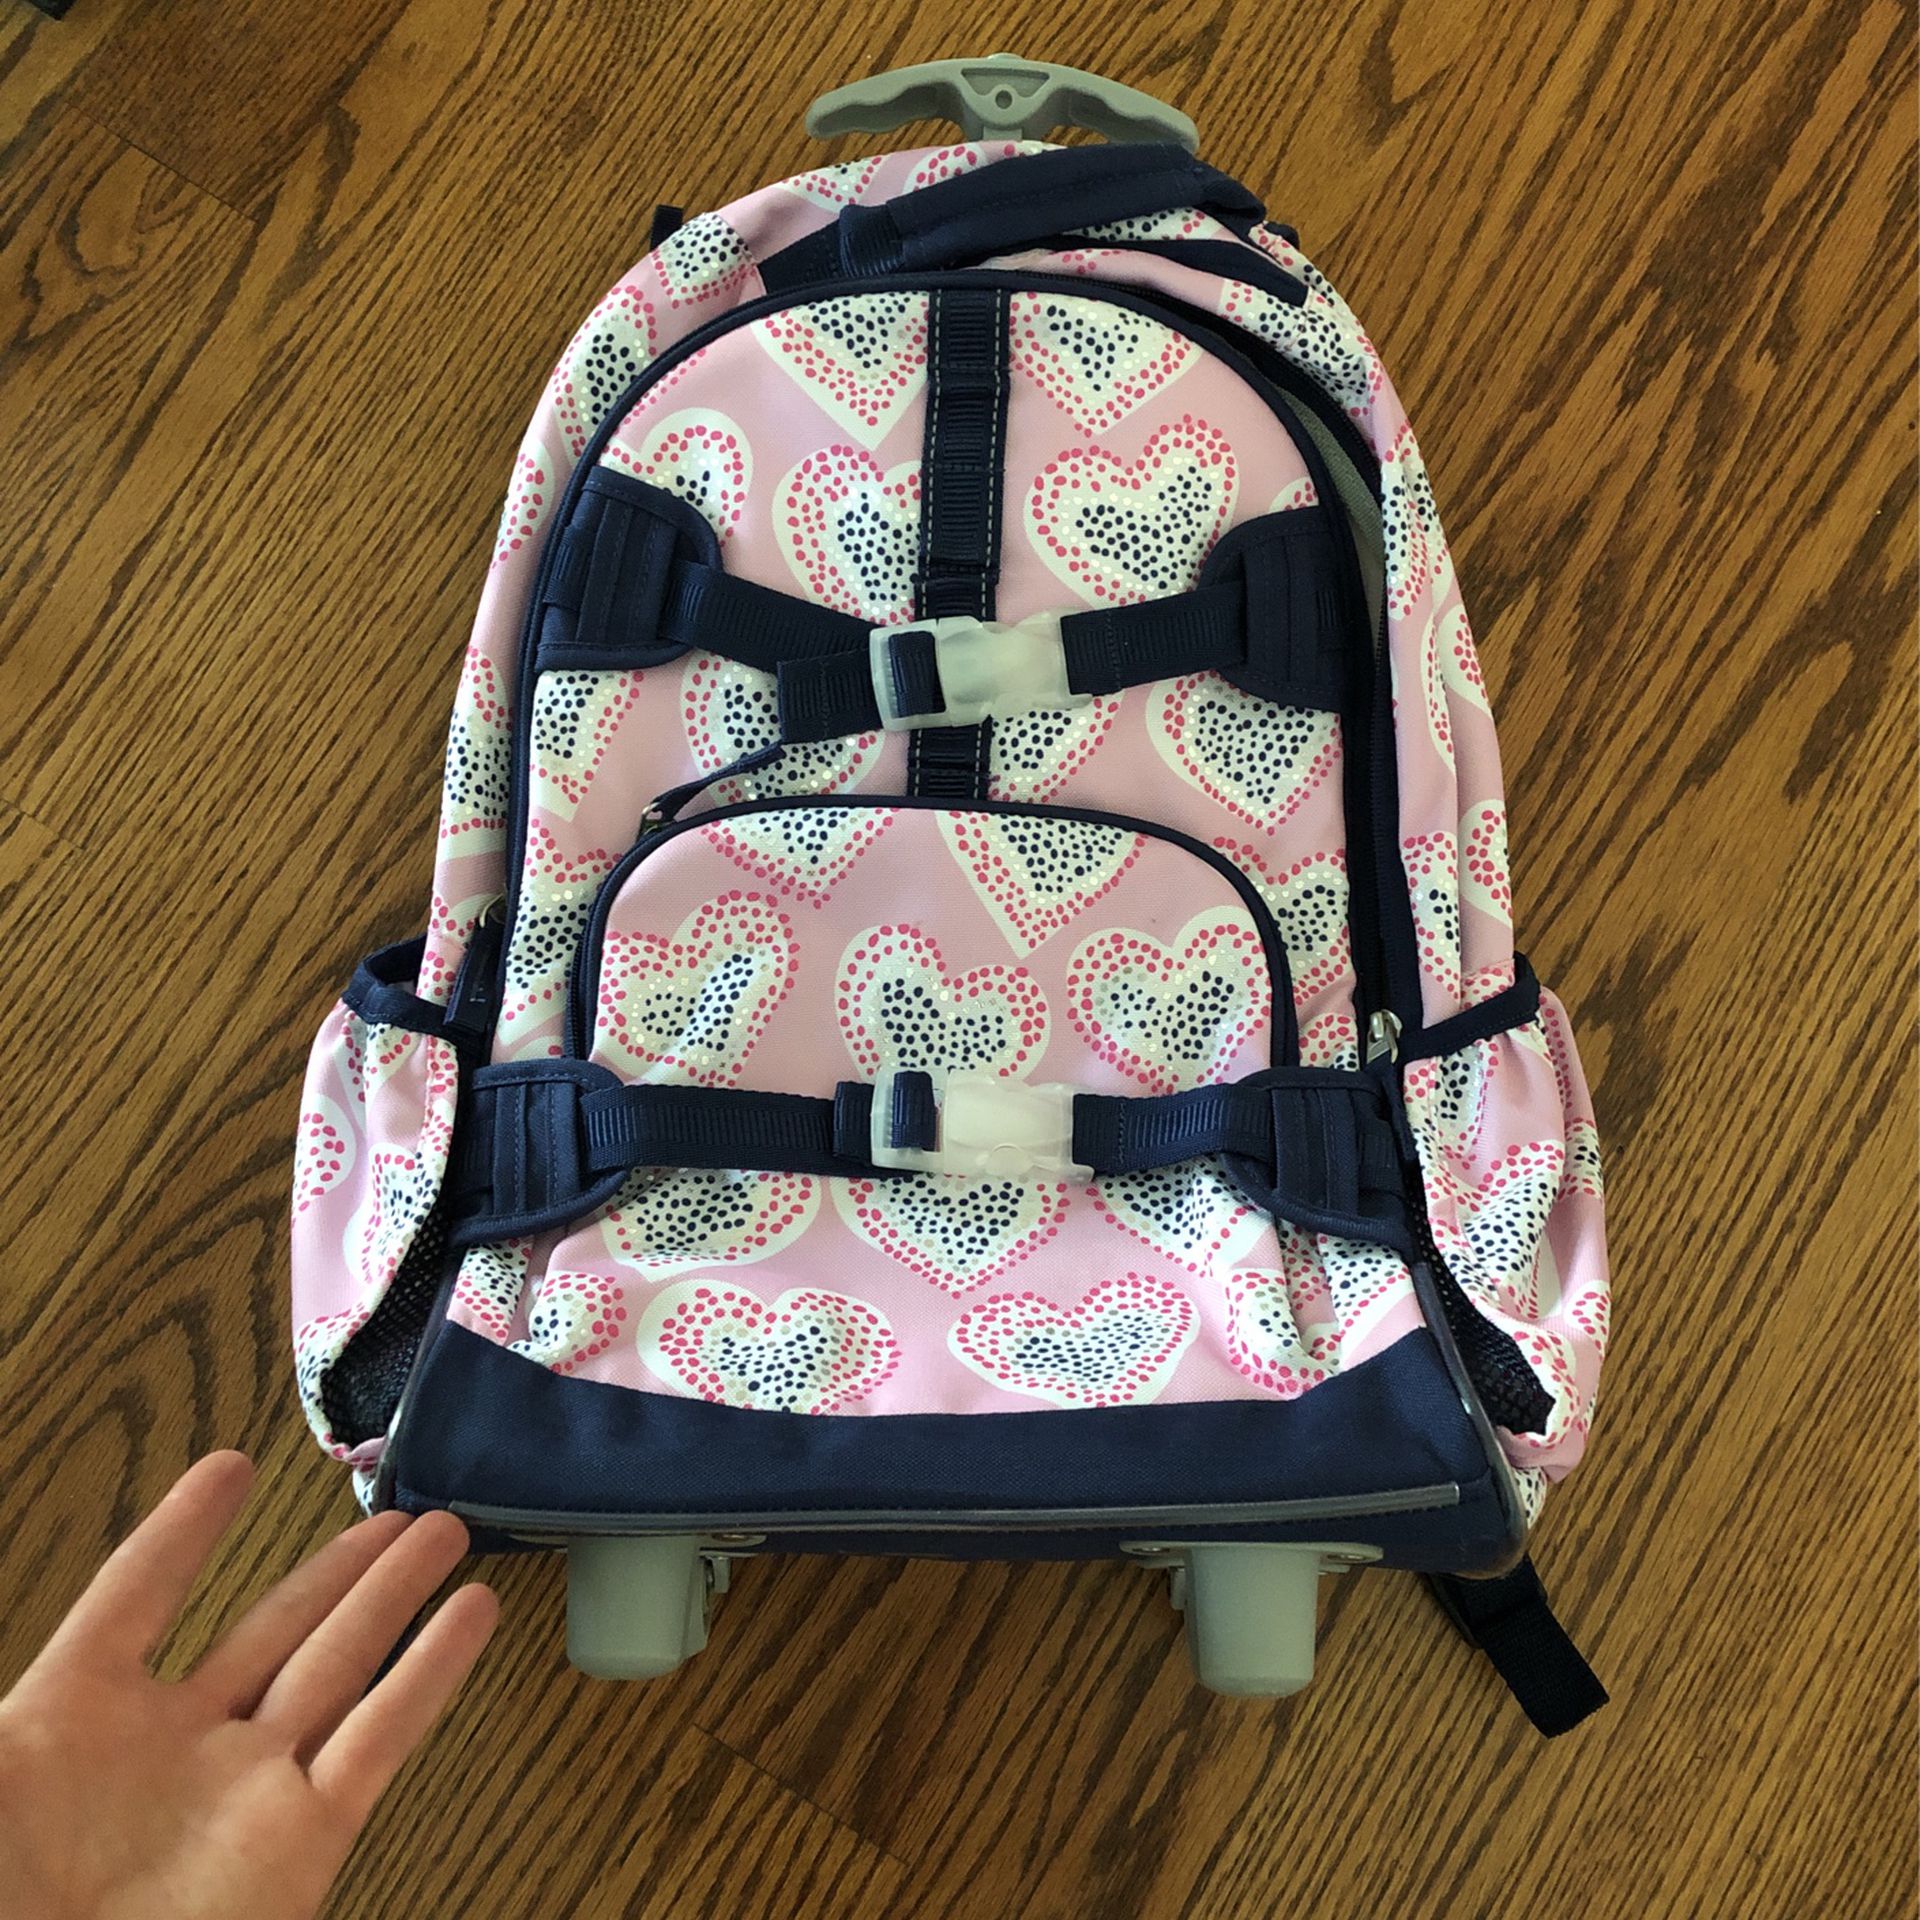 Backpack Pottery Barn With Wheels 